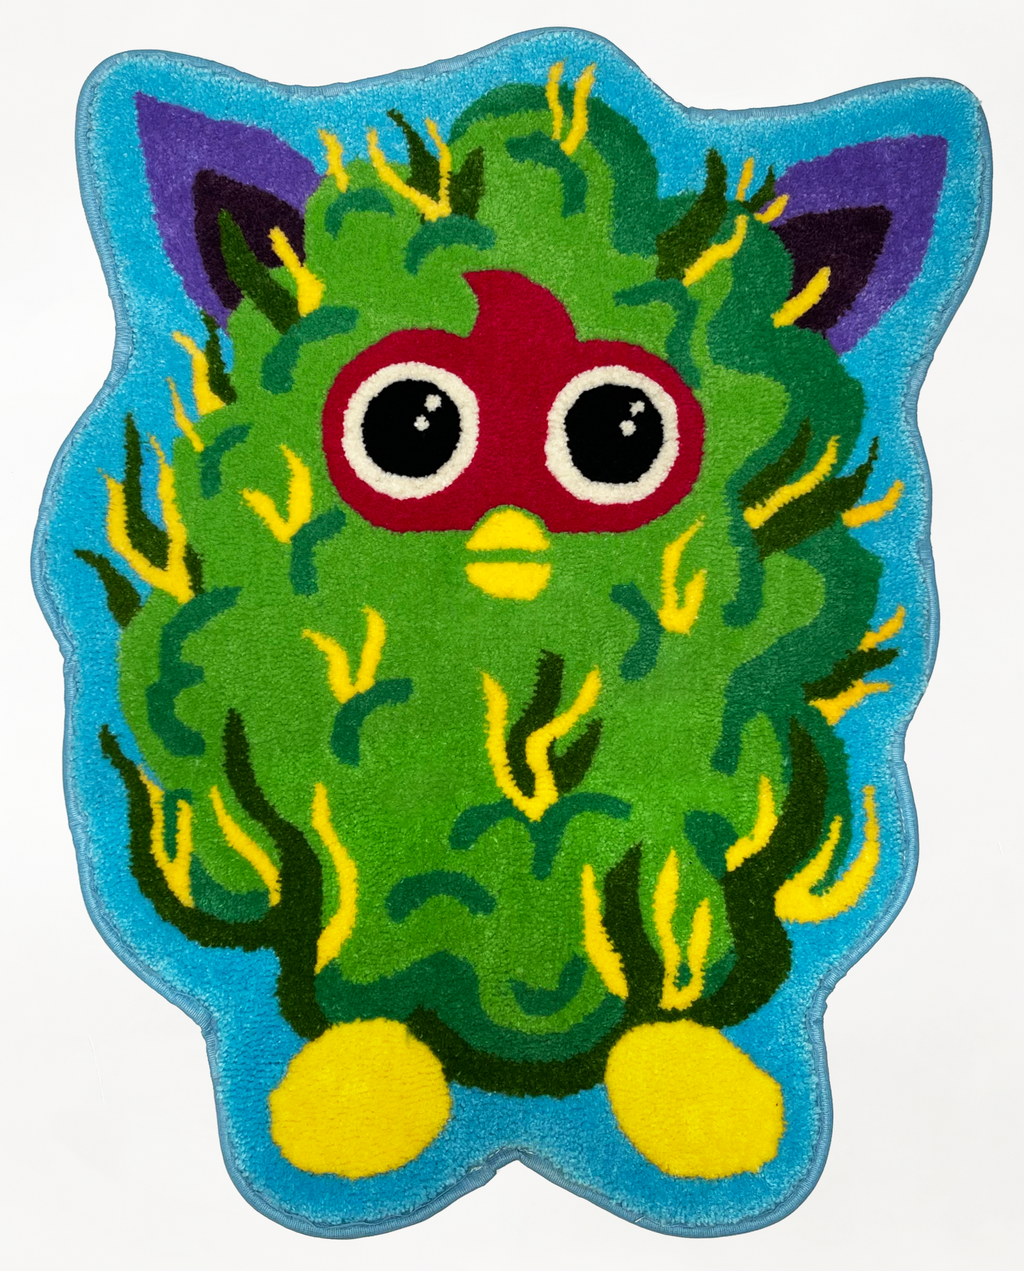 weed rug that makes a great gift for cannabis and marijuana lovers otherwise known as stoners. this rug is handmade in canada and limited edition. furby